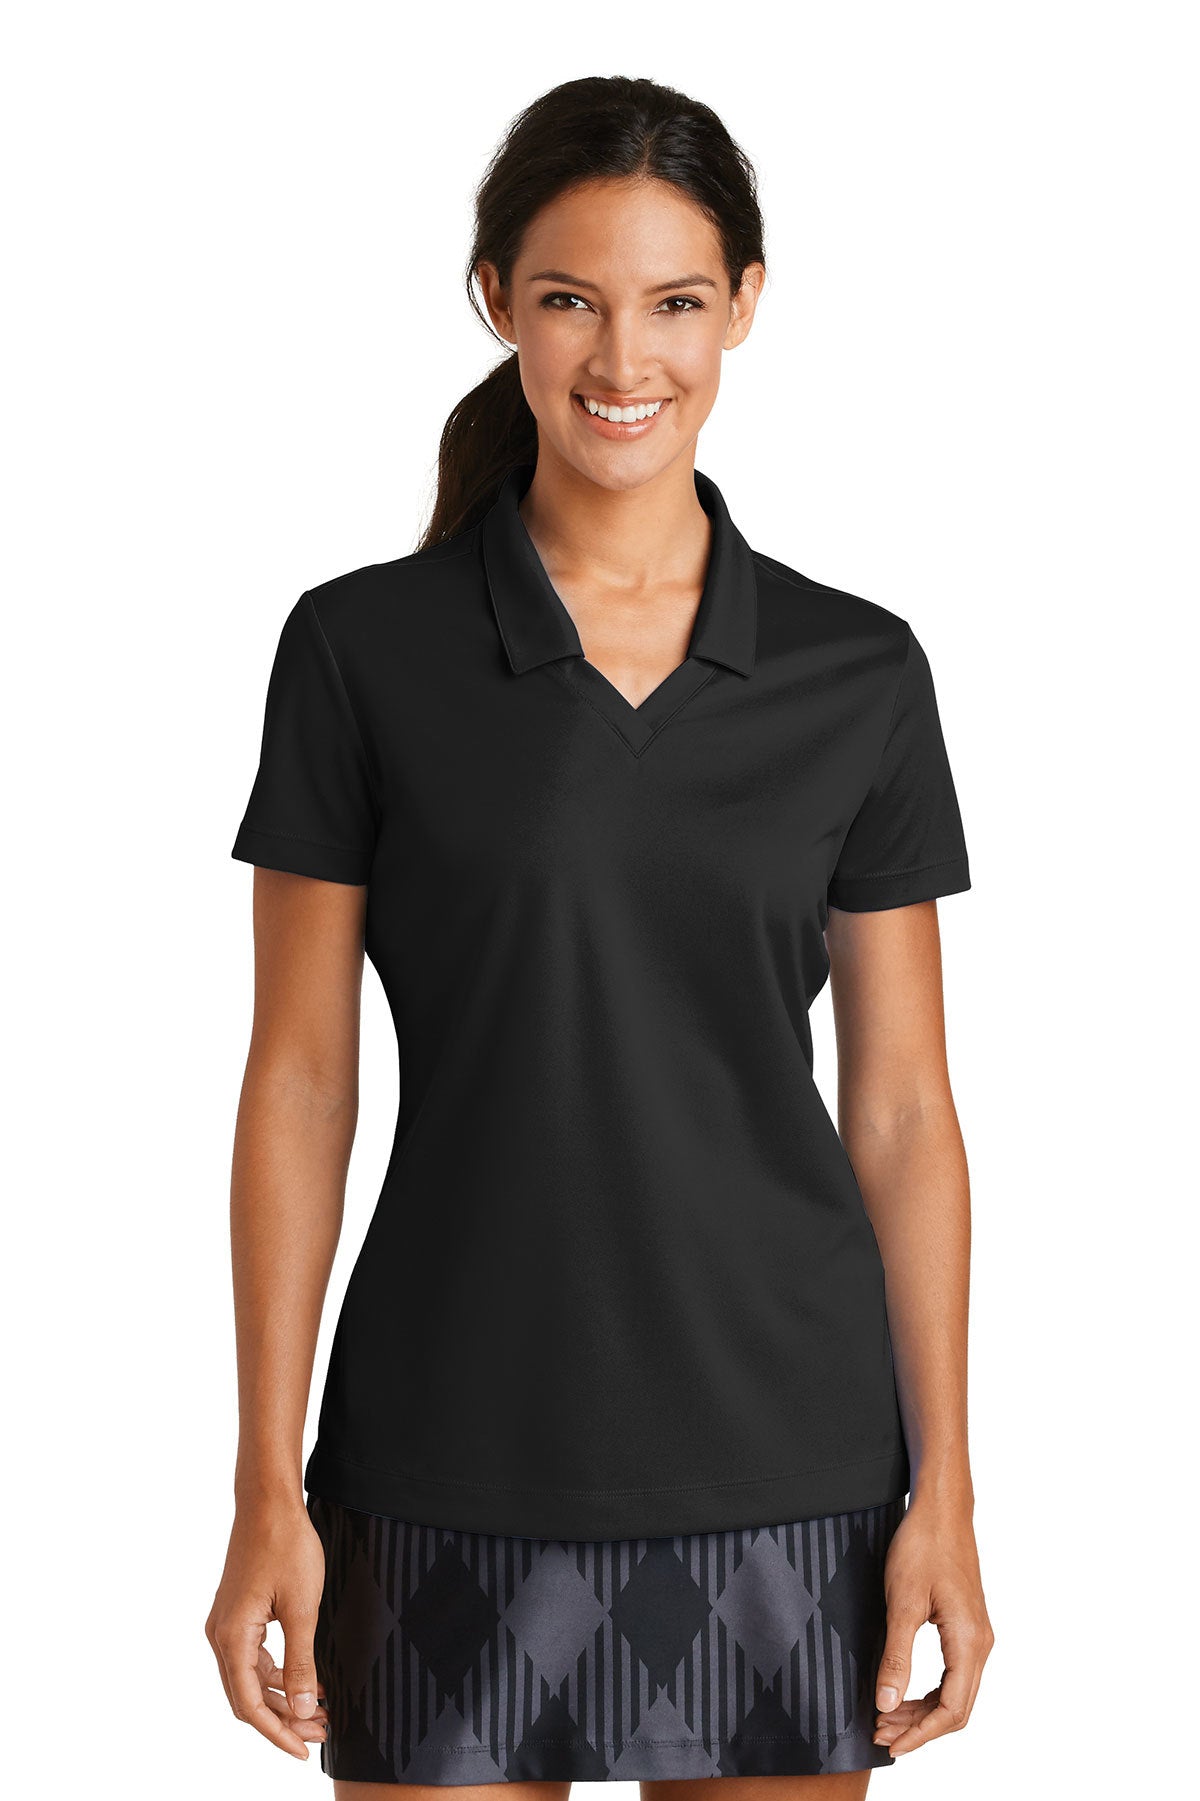 LL Loon Lake Words Only (Embroidered) Nike Women's Golf Polo